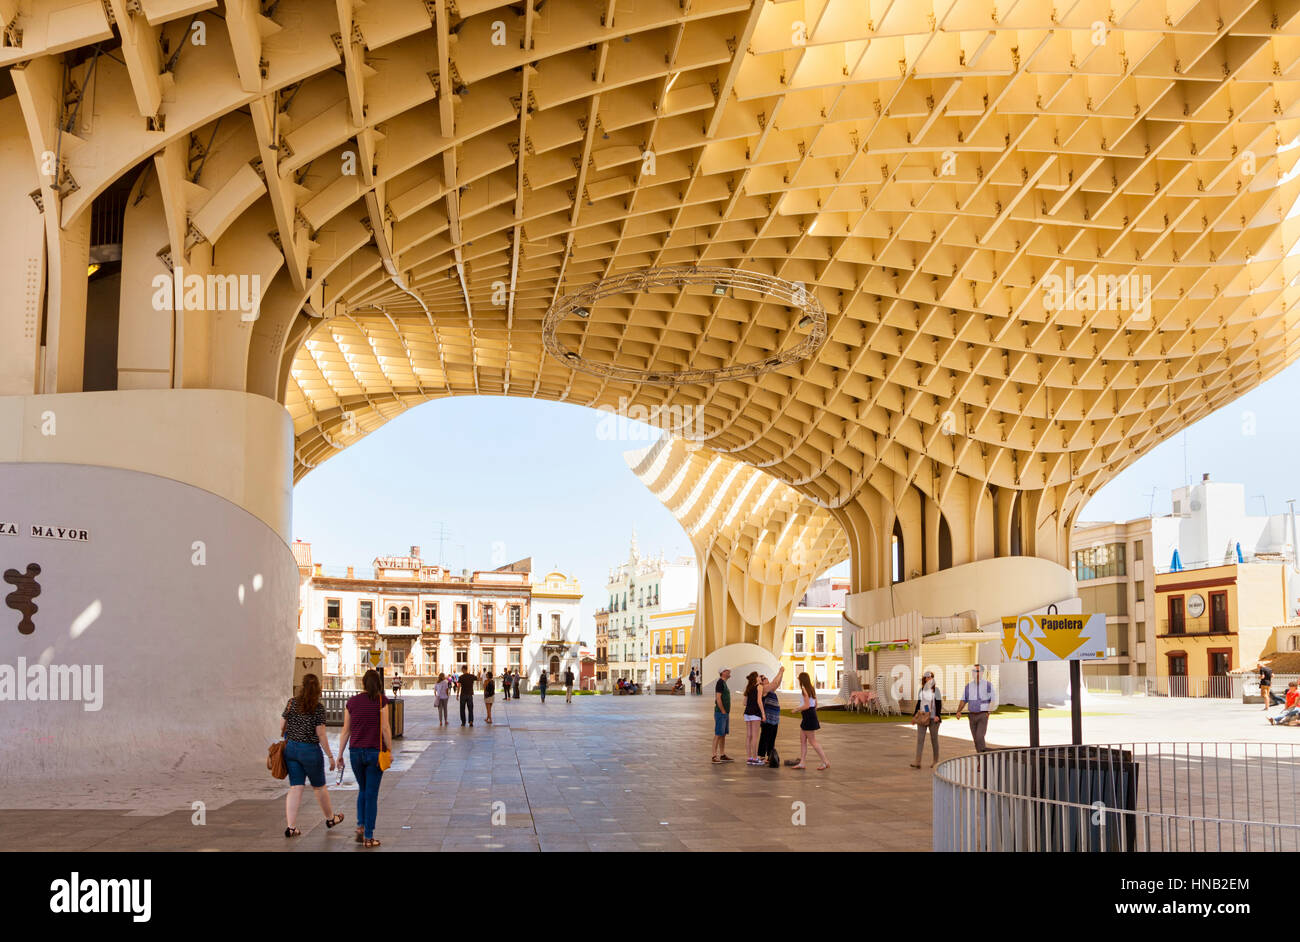 Seville, Spain - May 1, 2016: People walking on Plaza Mayor, the lower level of Espace Metropol Parasol, world’s largest wooden structure Stock Photo